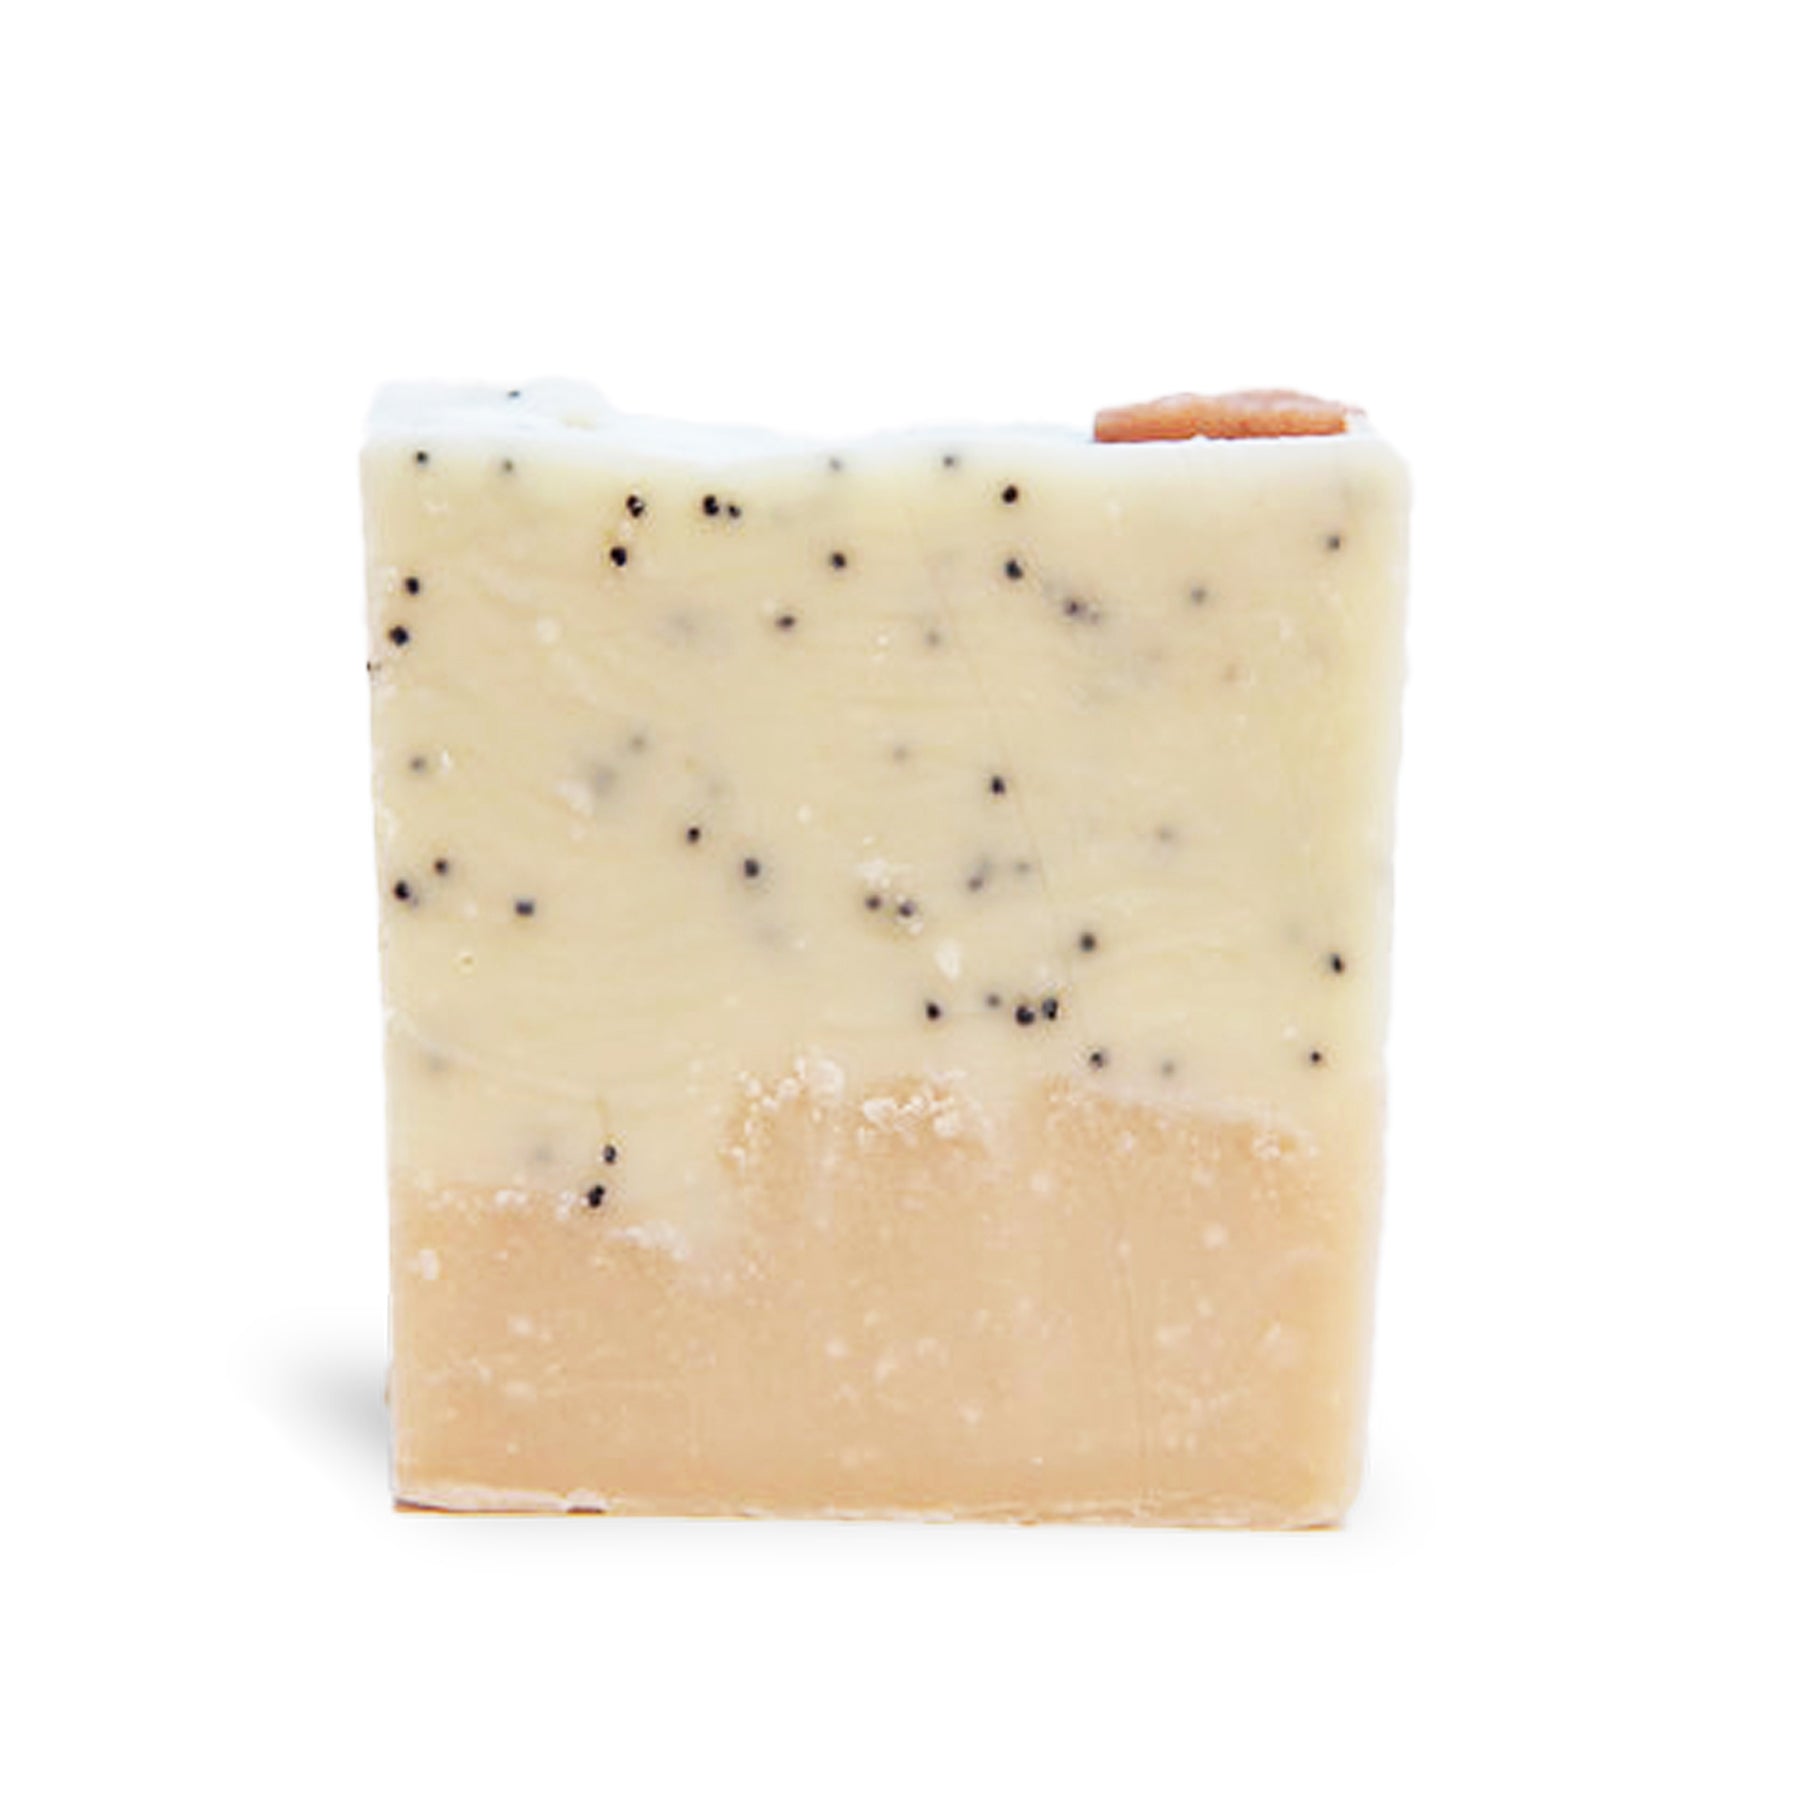 Scrub Soap with Lavender and Poppy Seeds